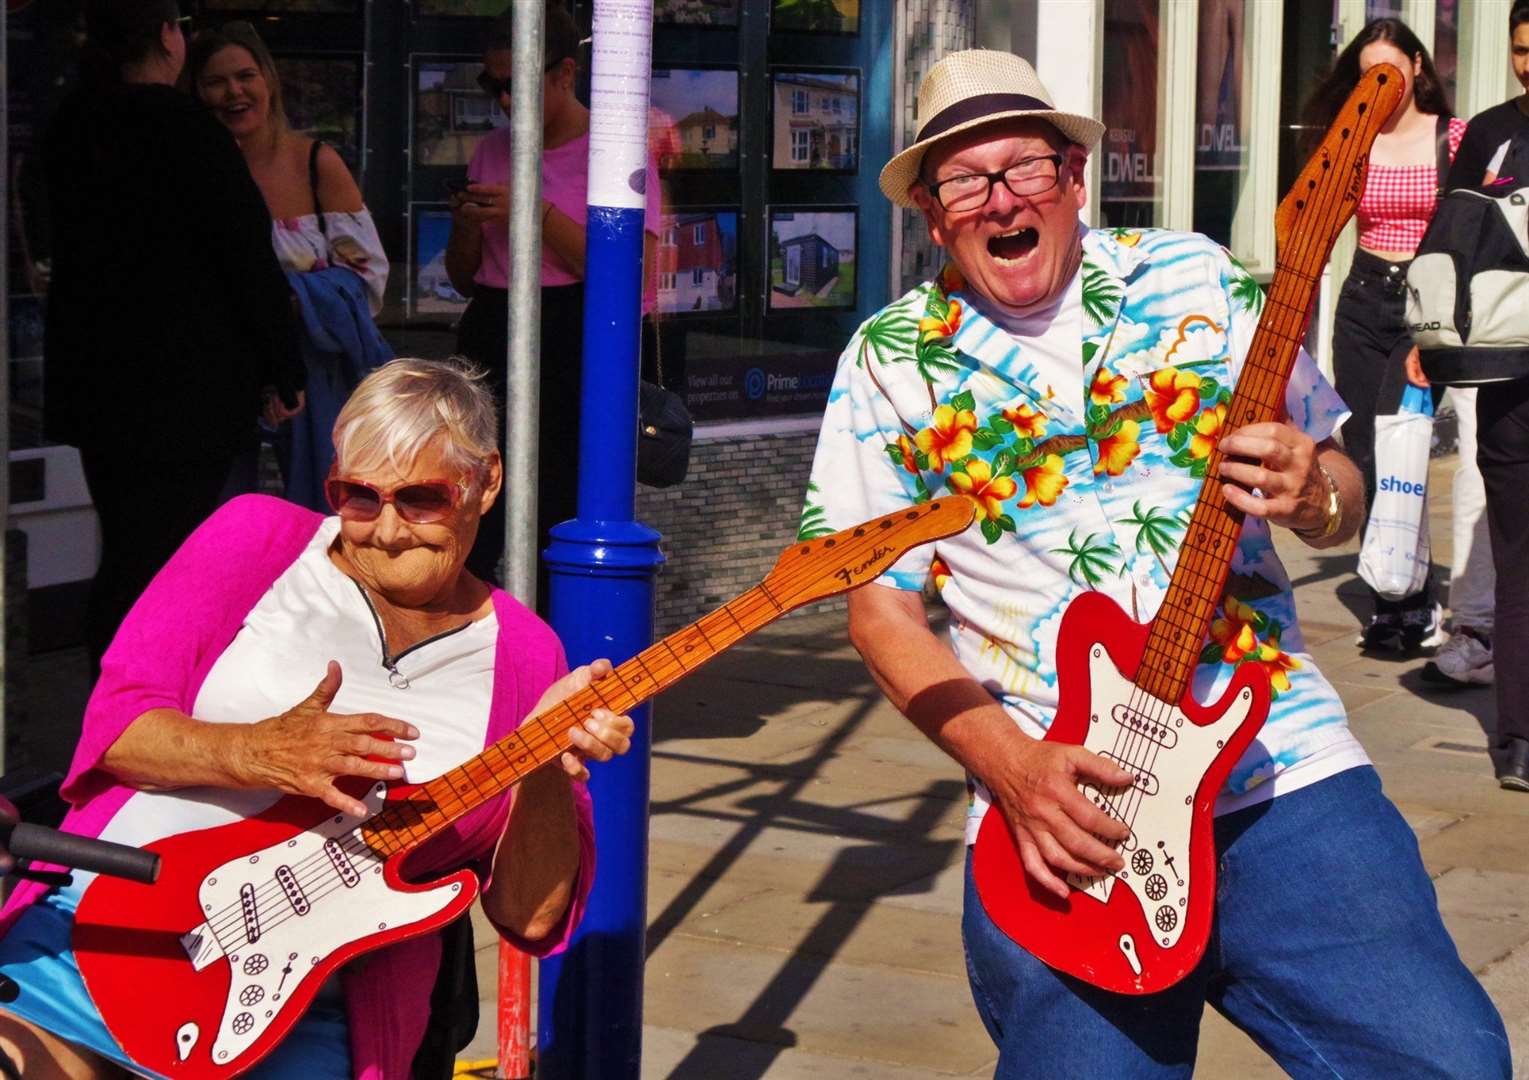 John Nurden and music fan Kathleen have a blast on the air guitar at Free Music Friday in Sheerness Broadway. Picture: Phil Crowder